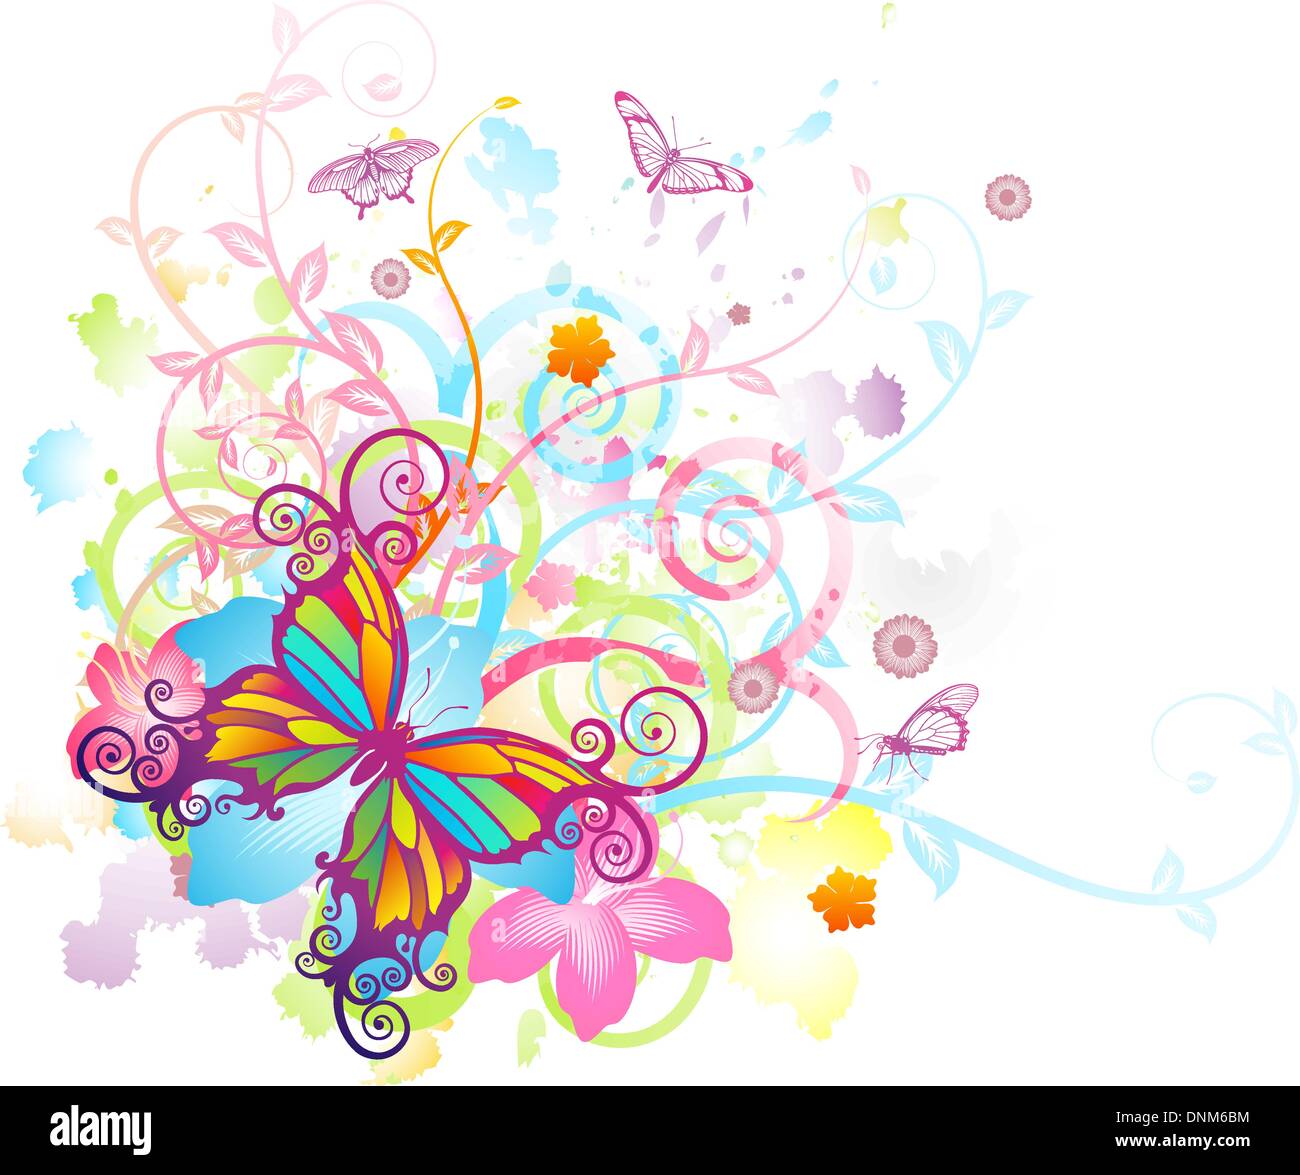 Abstract colourful butterfly background with stylised floral elements, patterns and splashes Stock Vector